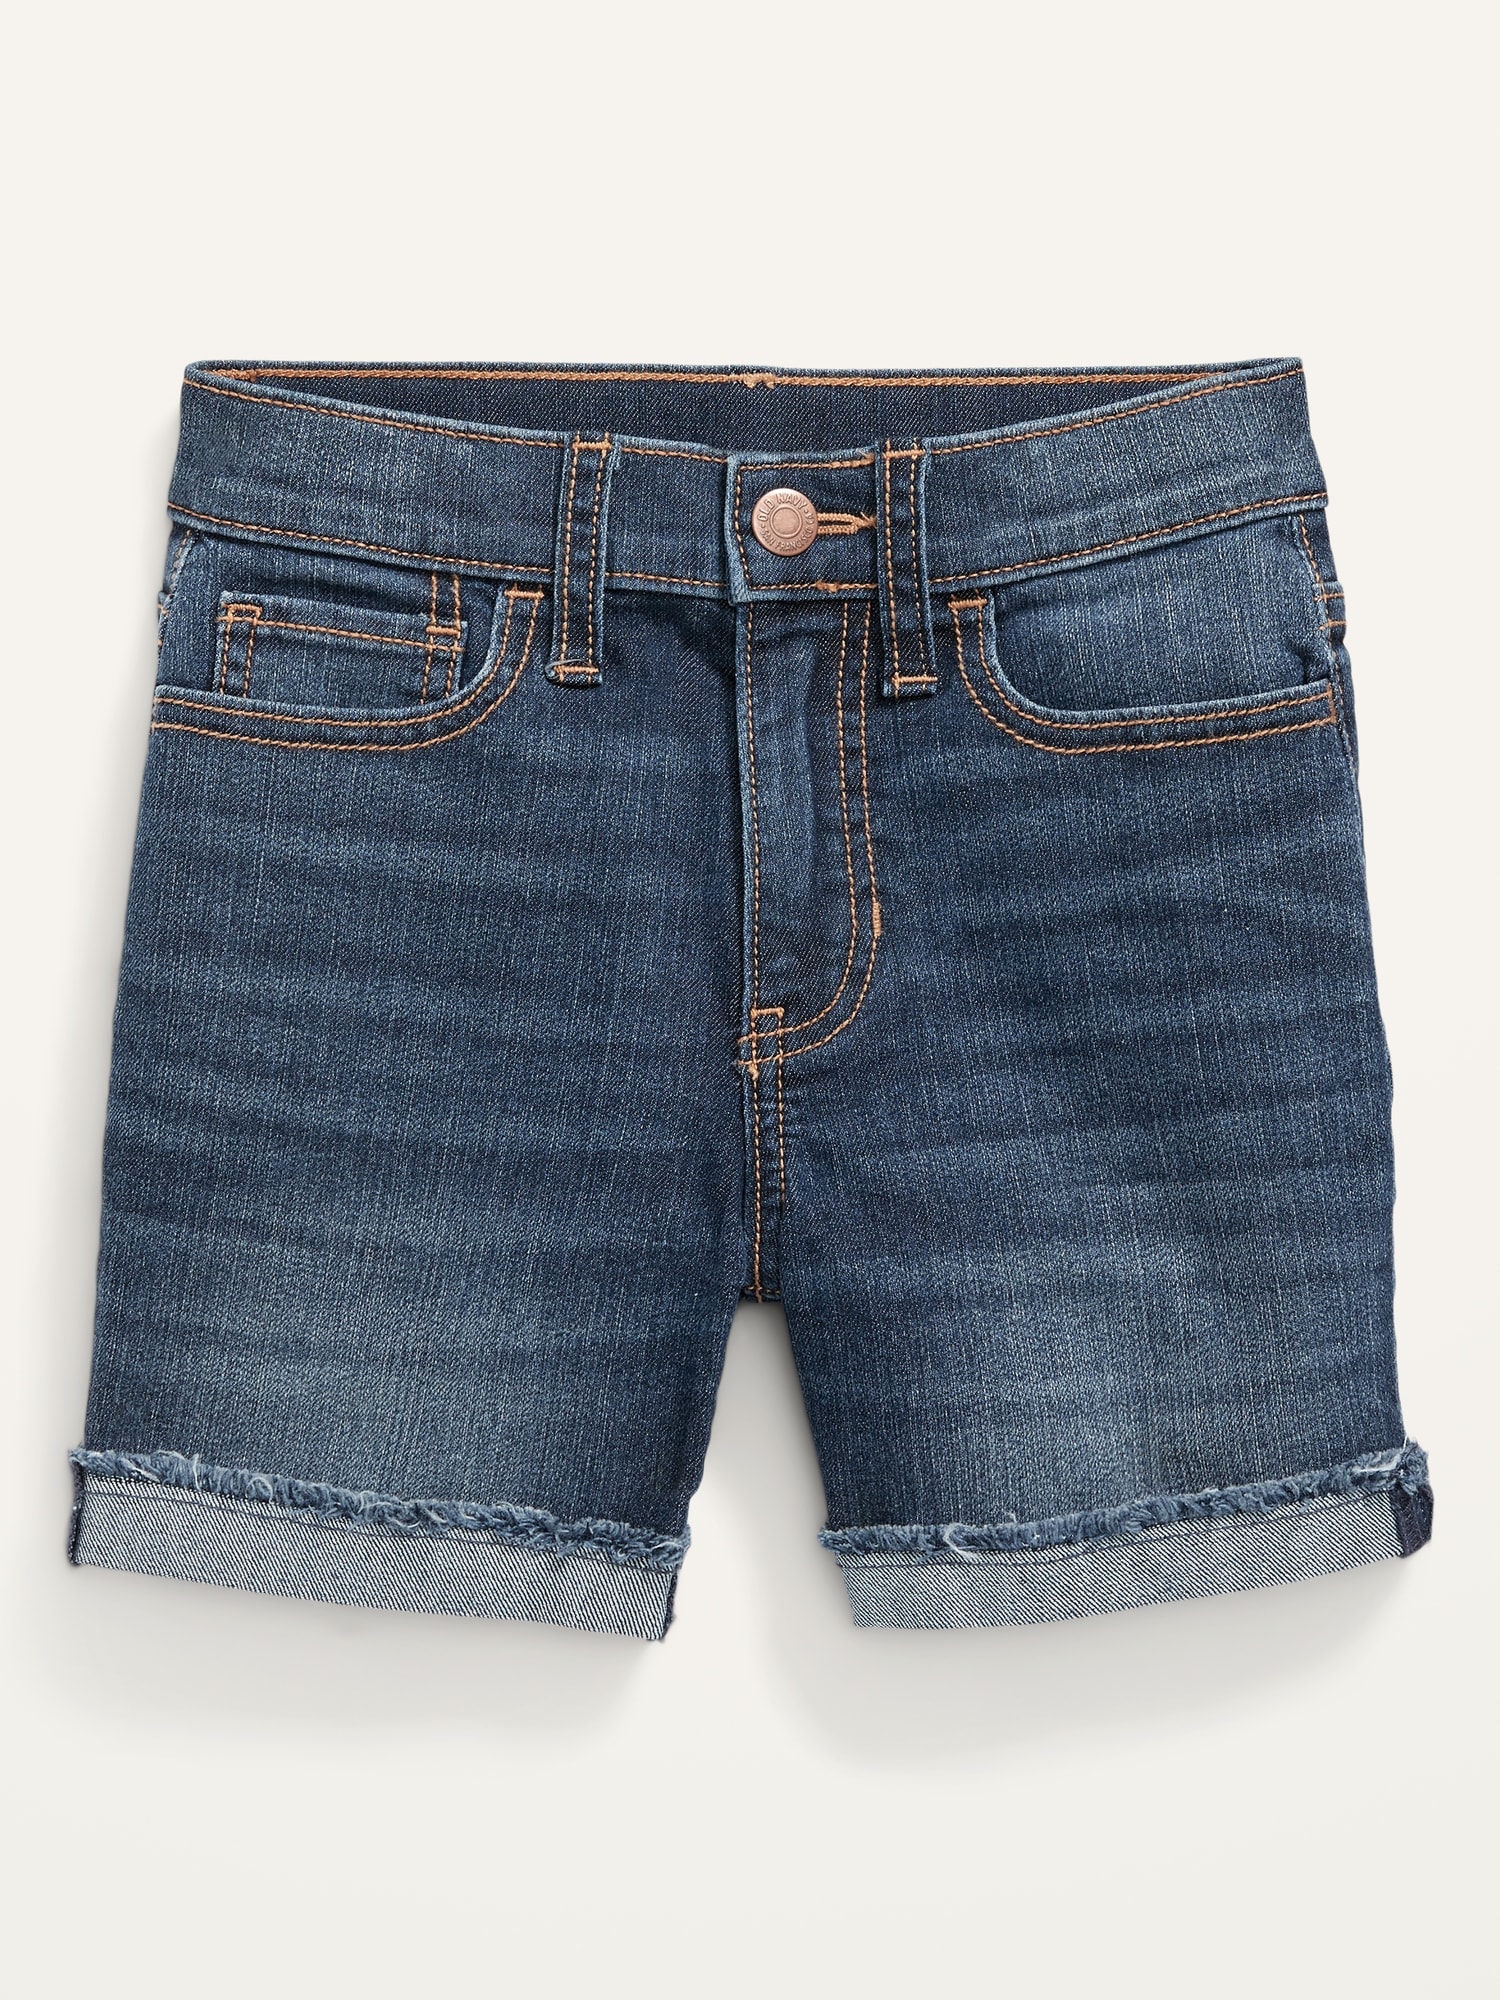 Old Navy High-Waisted Button-Fly Ripped Jean Midi Shorts for Girls blue. 1